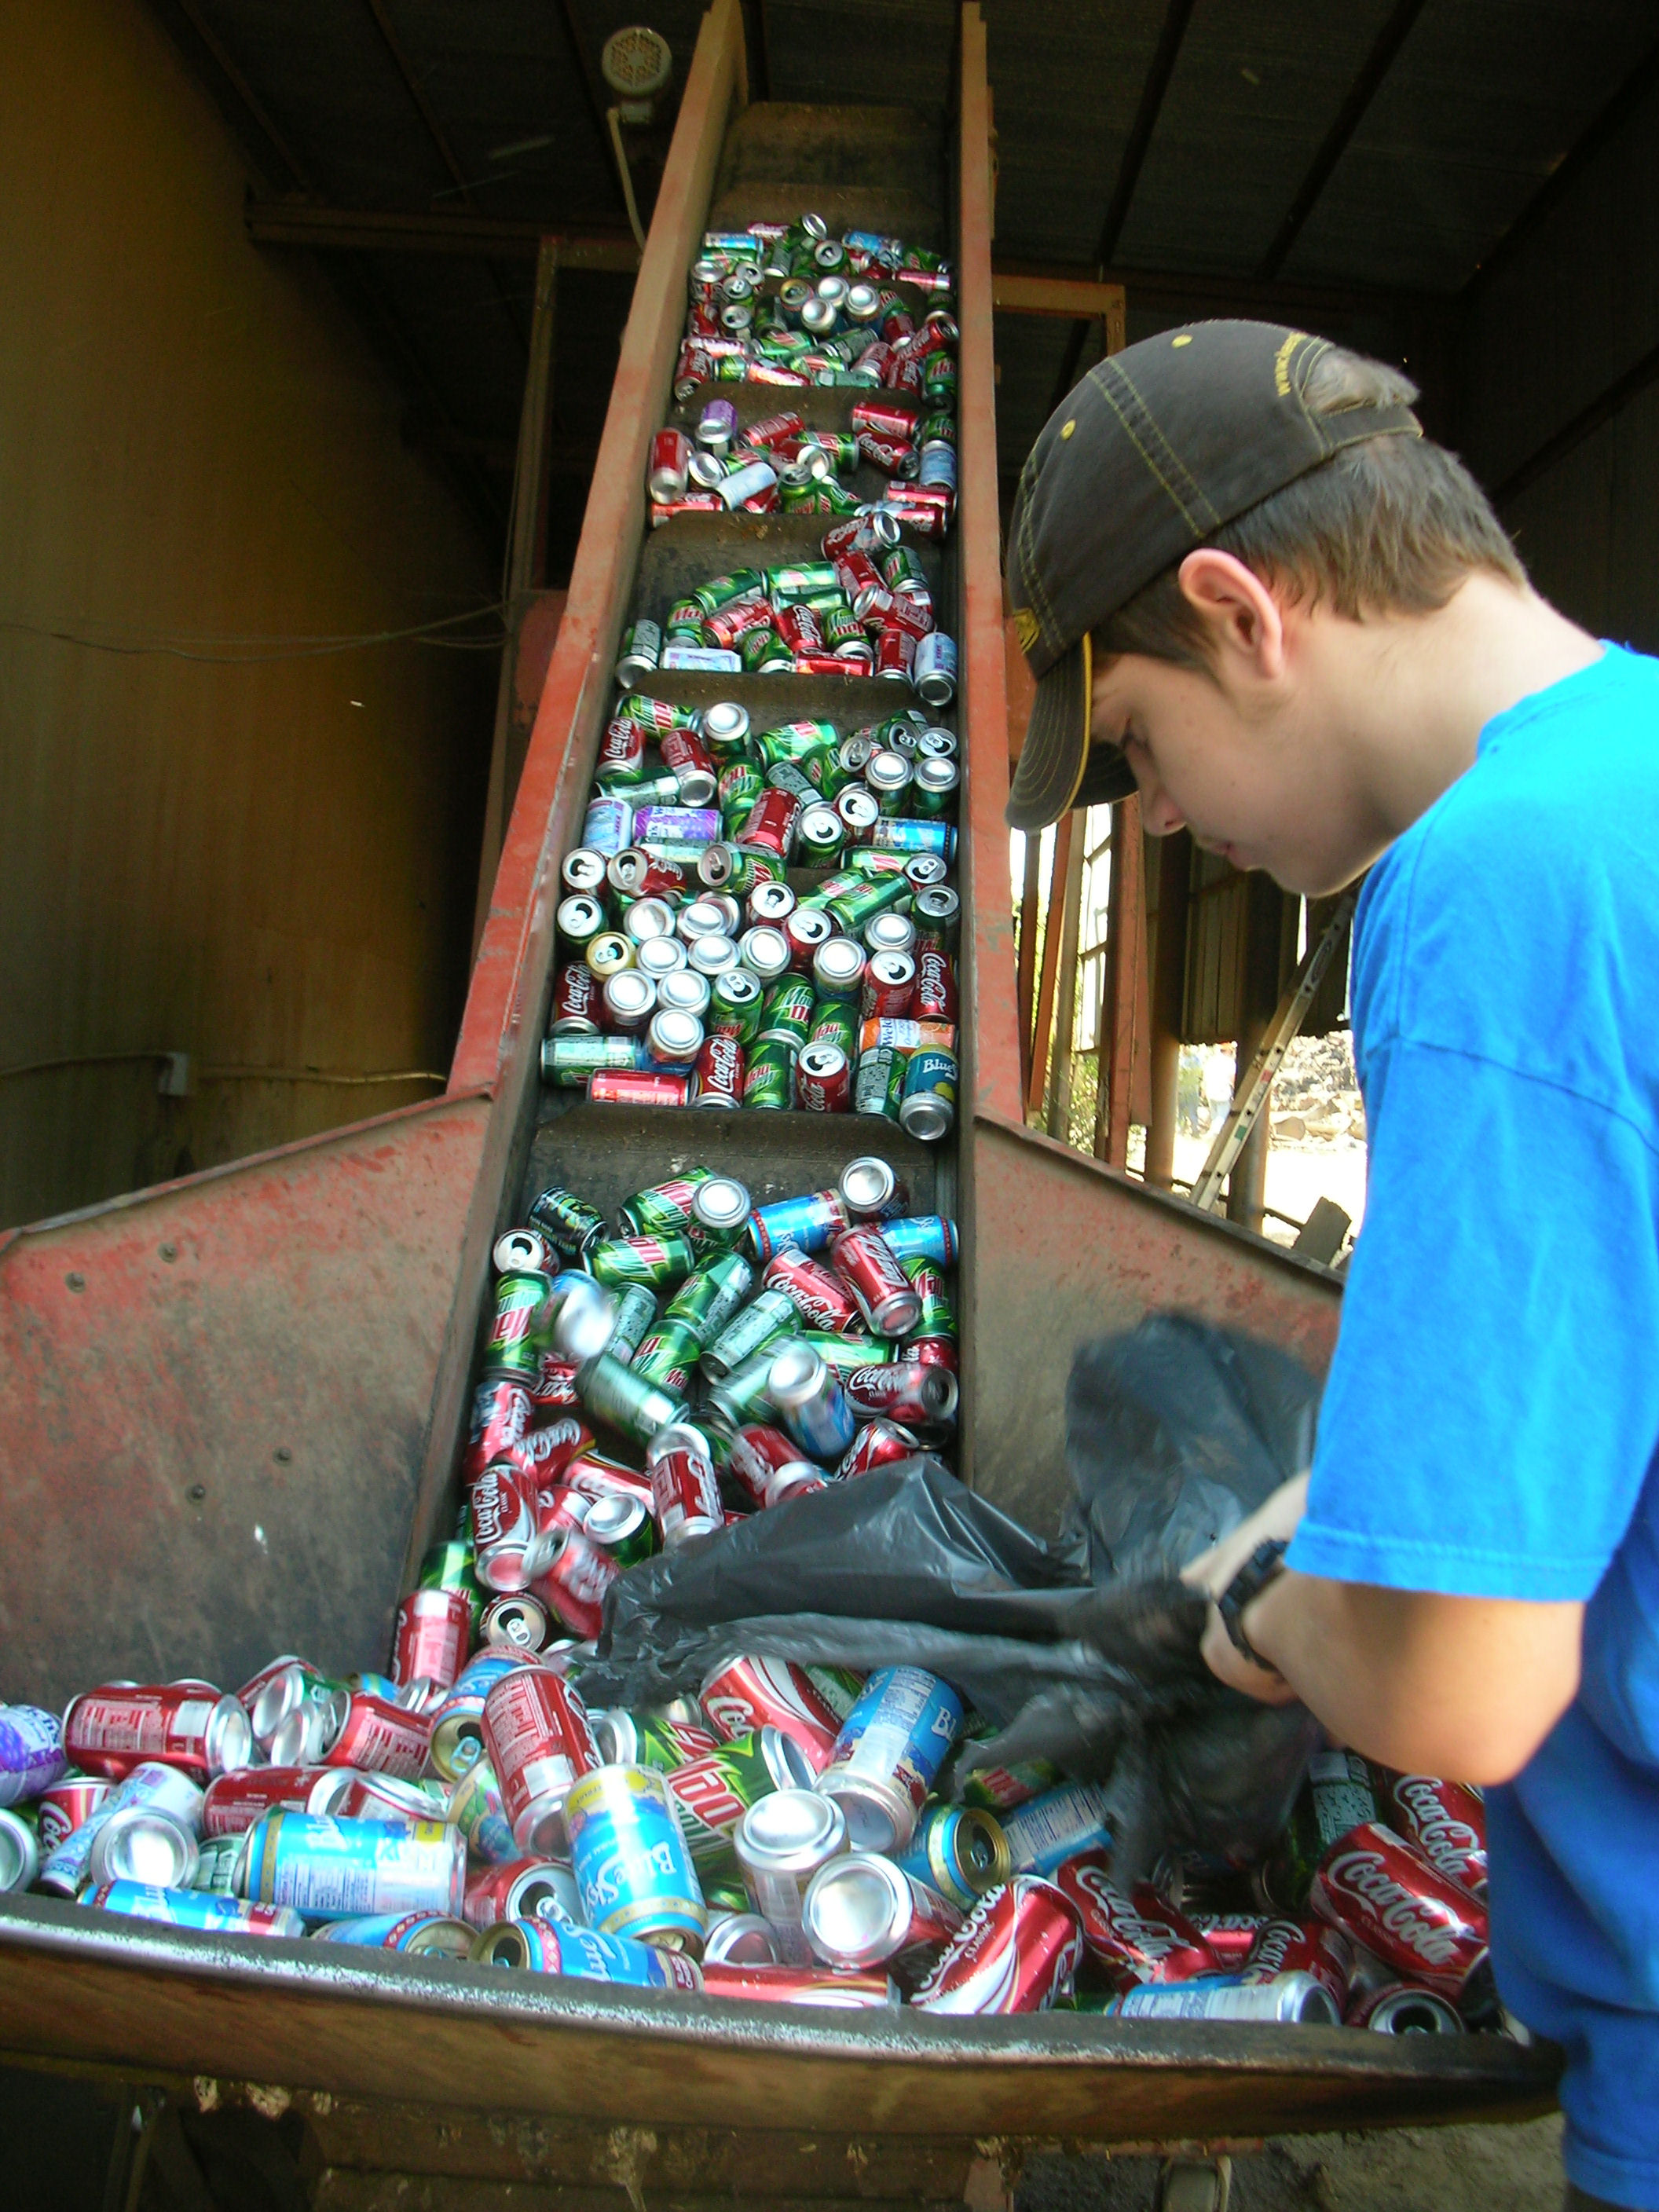 Recycle Soda Cans